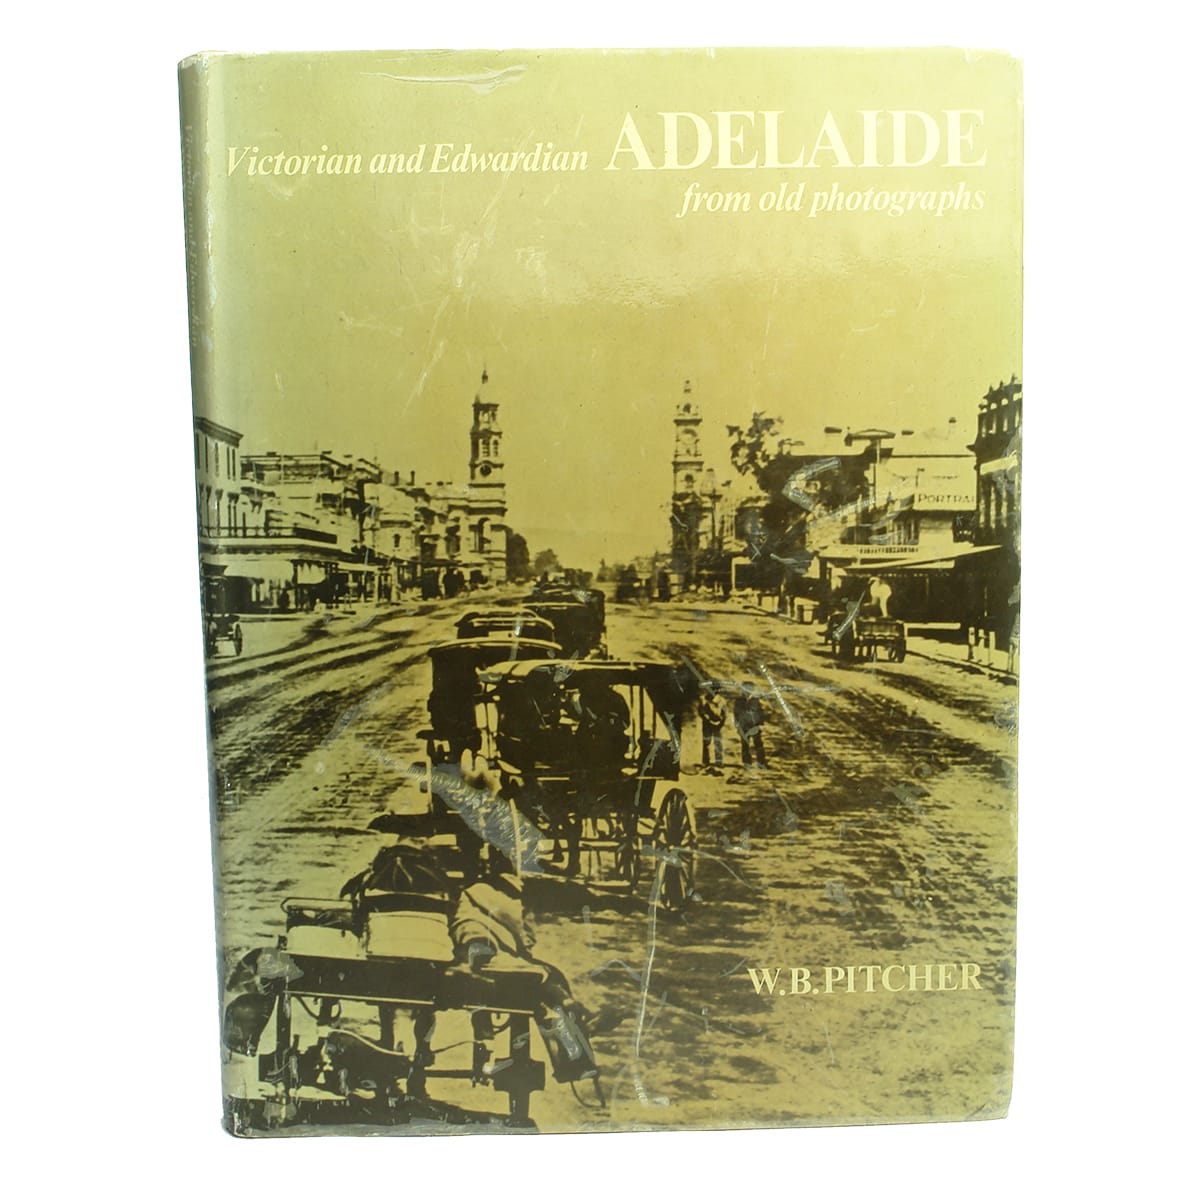 Book.  Victorian and Edwardian Adelaide from old photographs, by W. B. Pitcher.